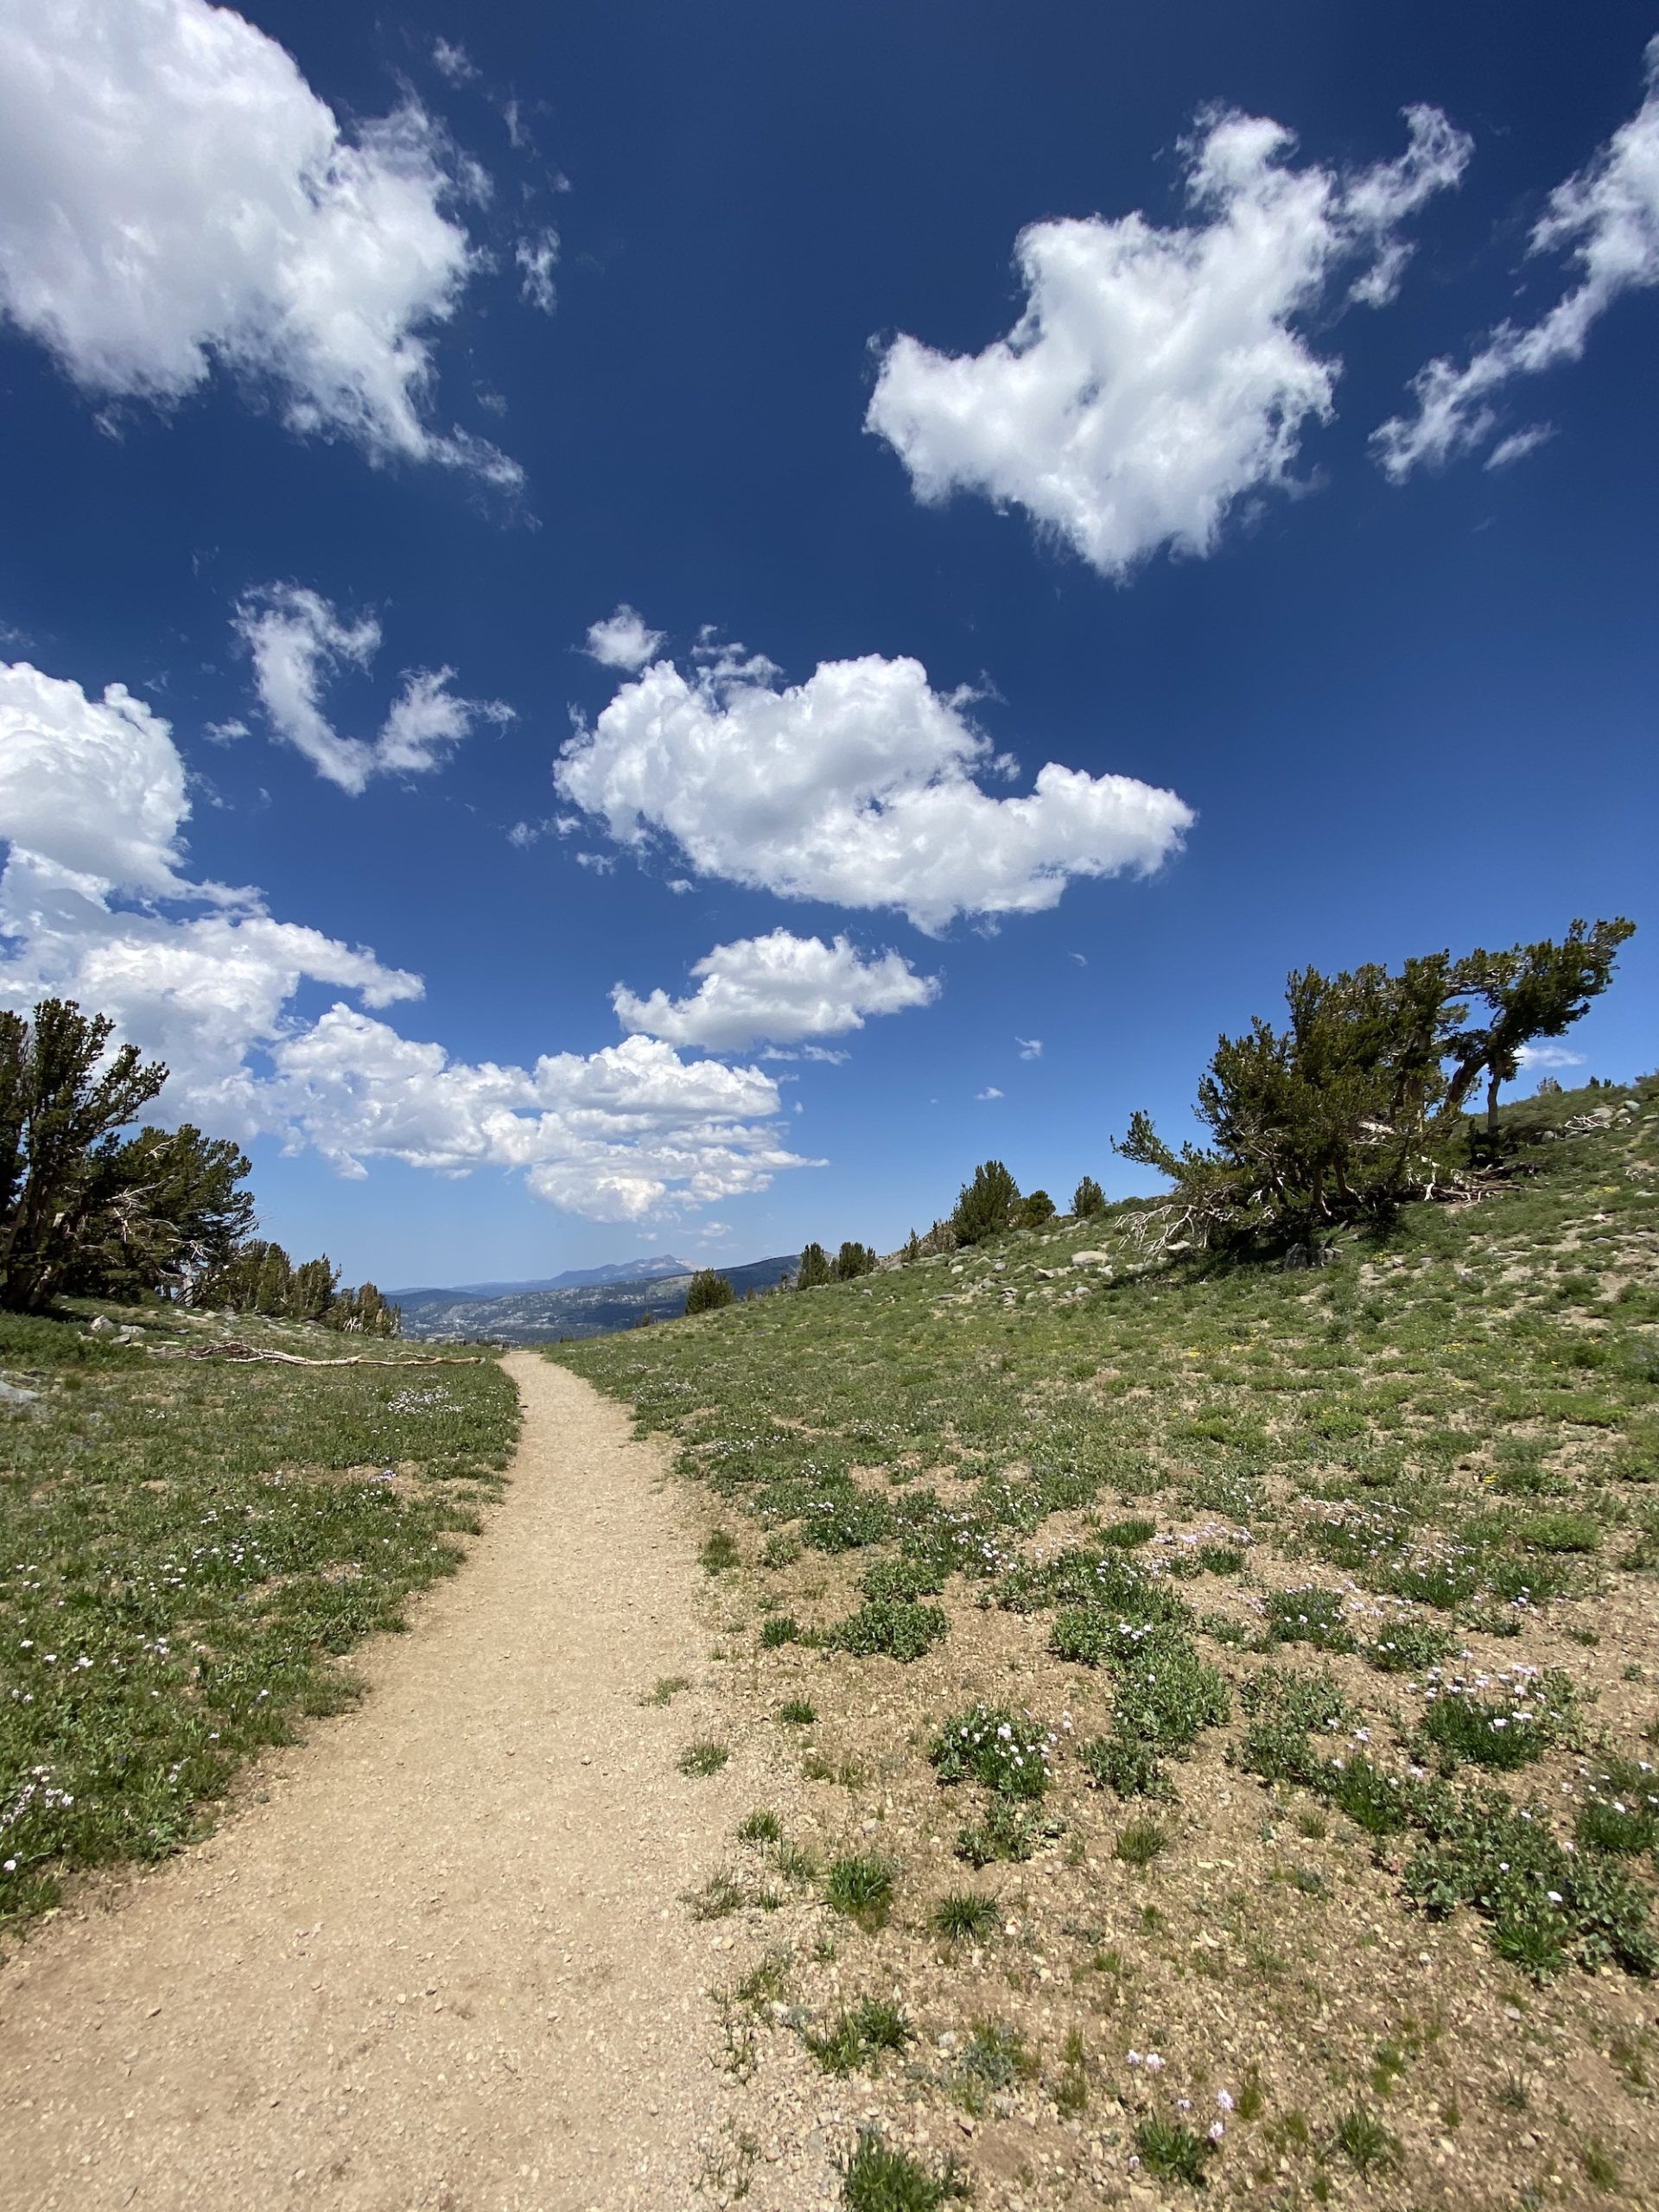 A trail leading off into the distance below a bright blue sky with white clouds